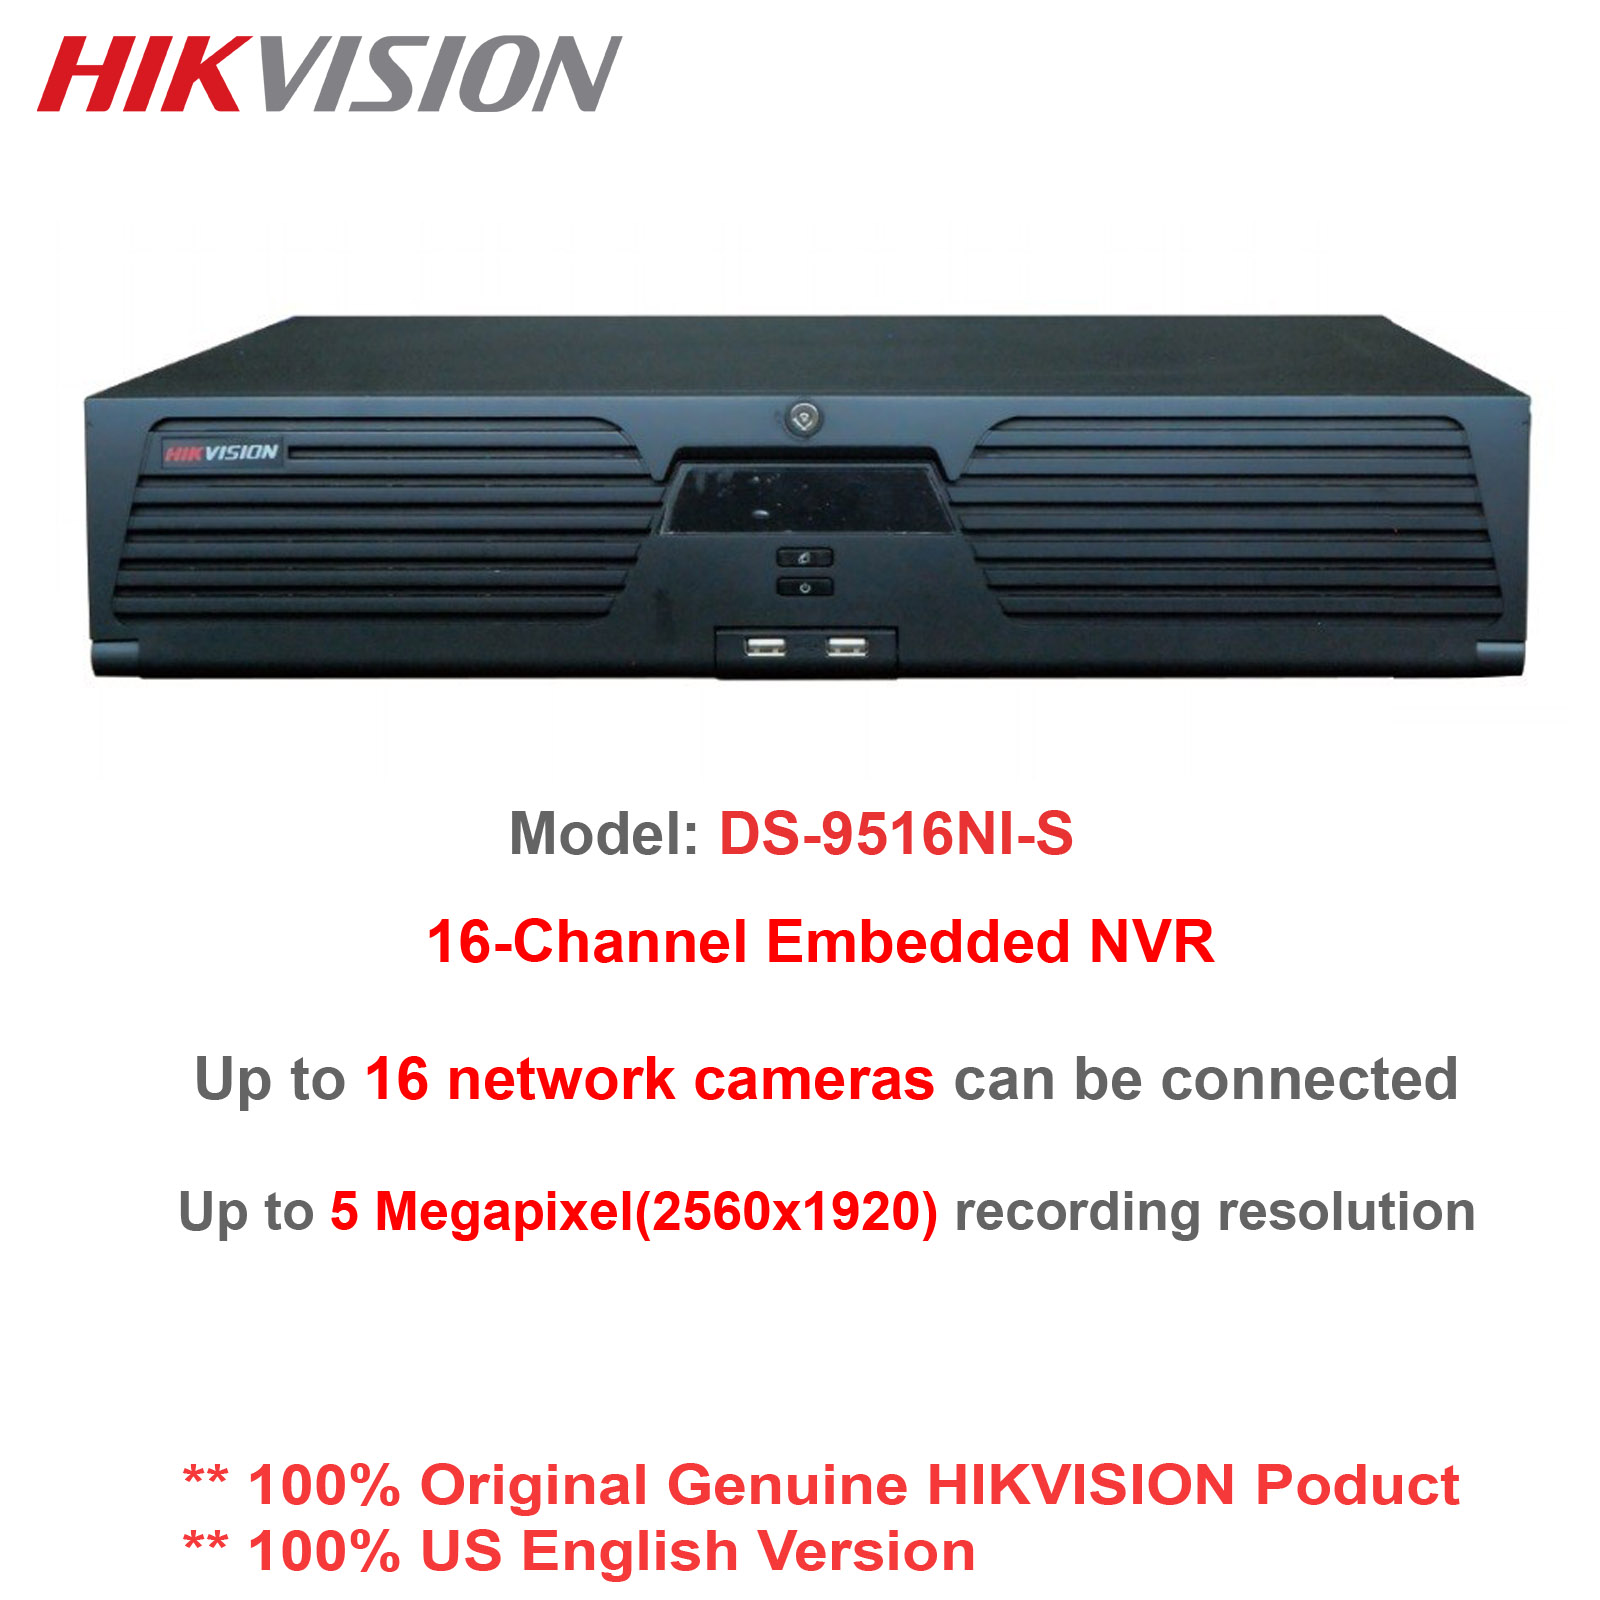 ds 9516 hikvision firmware